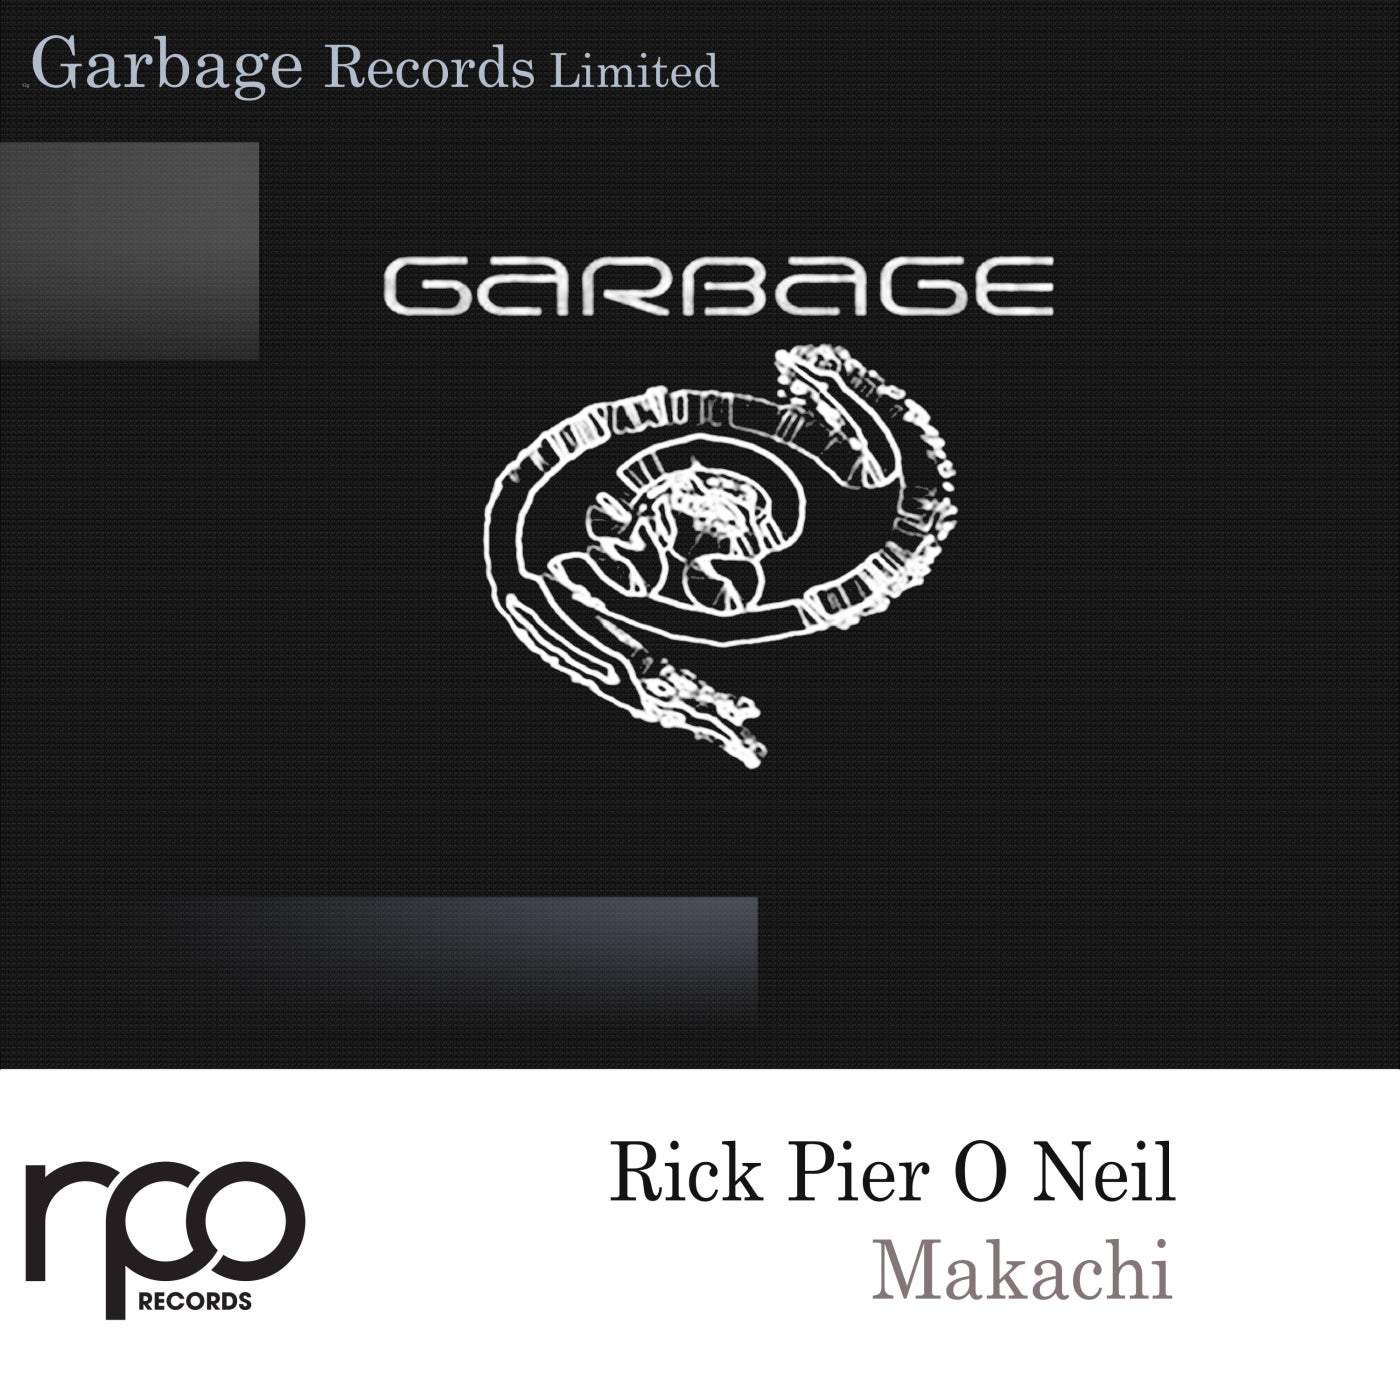 Download Gargage Records Limited on Electrobuzz